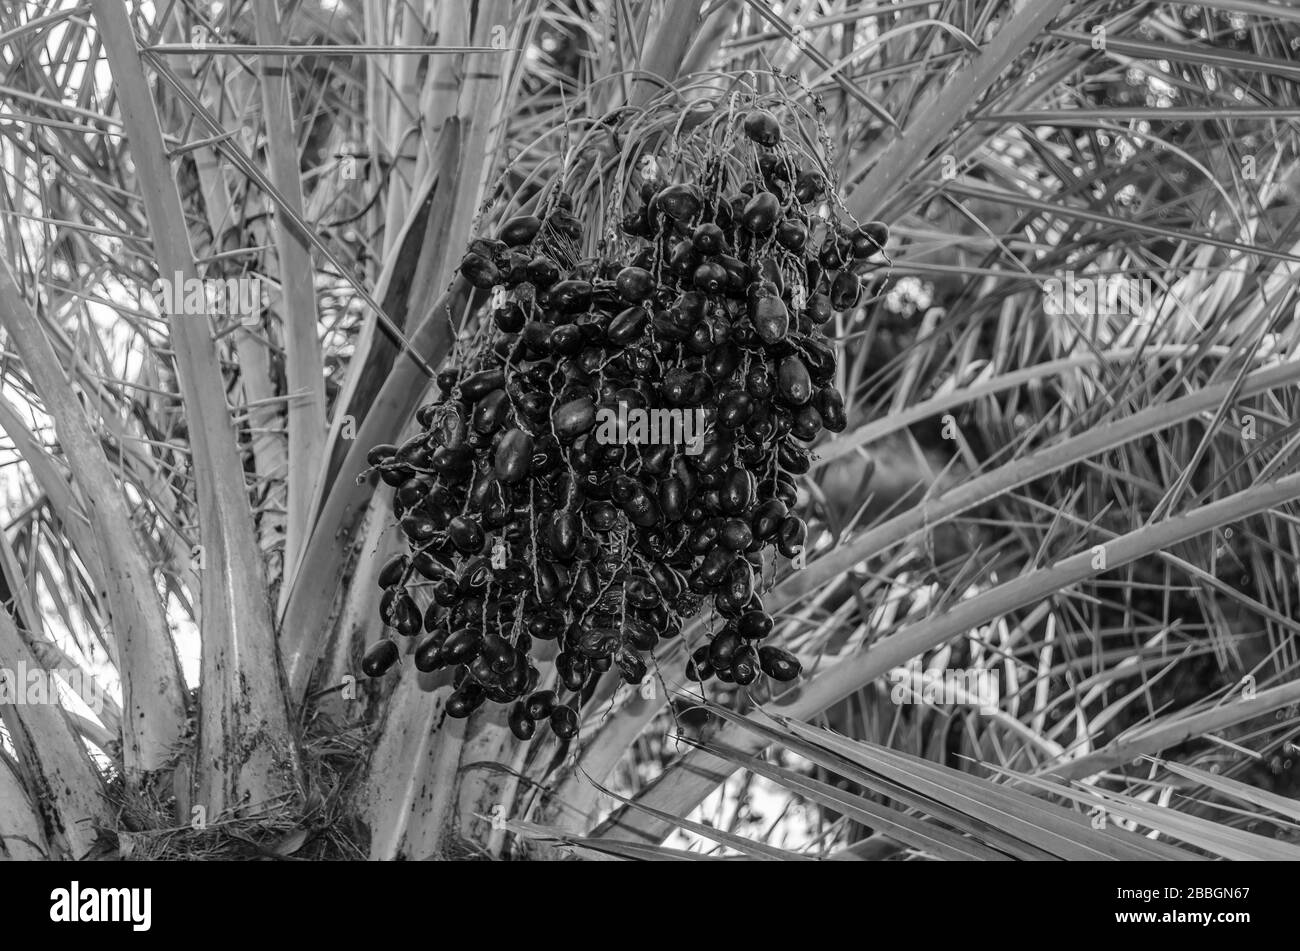 Detail of a date palm tree with ripped fruits, black and white image Stock Photo